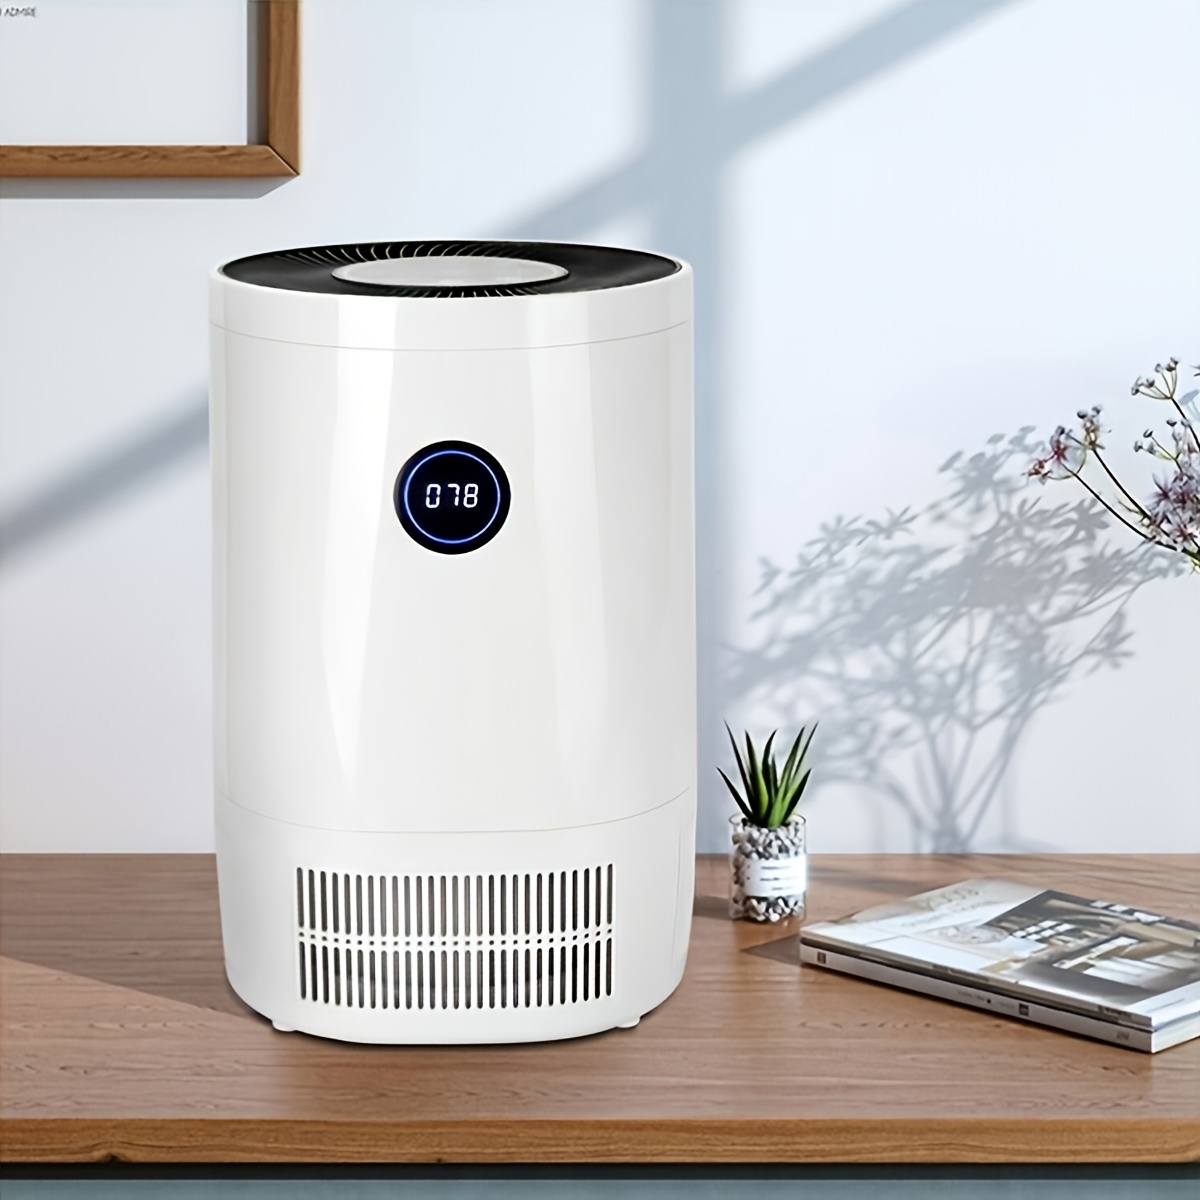 true hepa air purifier for home office living room digital display air cleaner with air monitor hepa filter removes 99 98 of smoke dust and pet dander night light covers up to 500 sq ft